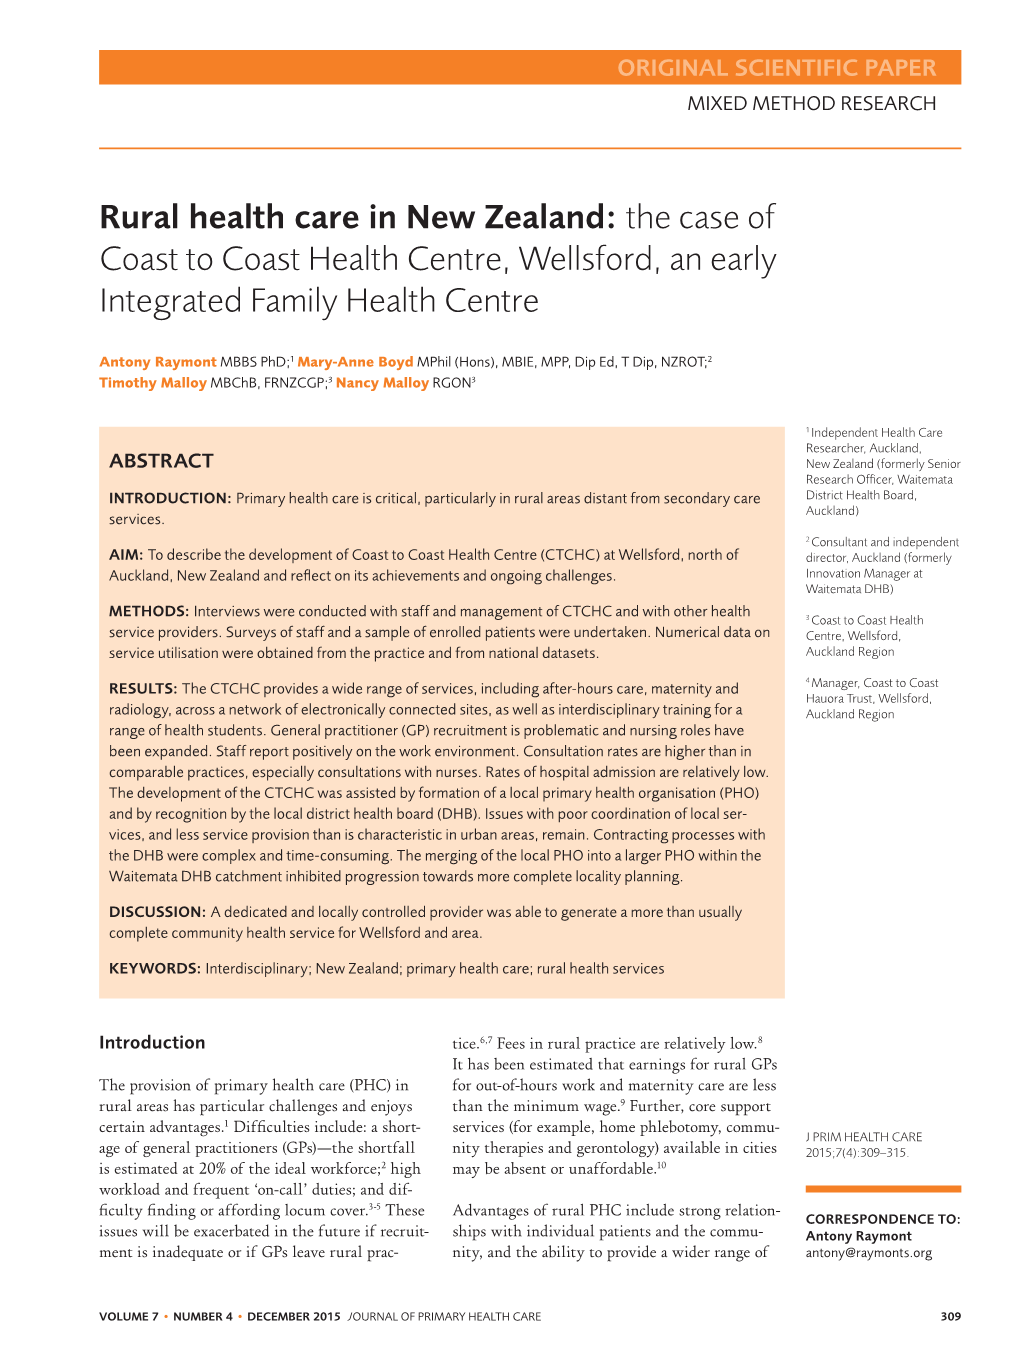 Rural Health Care in New Zealand: the Case of Coast to Coast Health Centre, Wellsford, an Early Integrated Family Health Centre